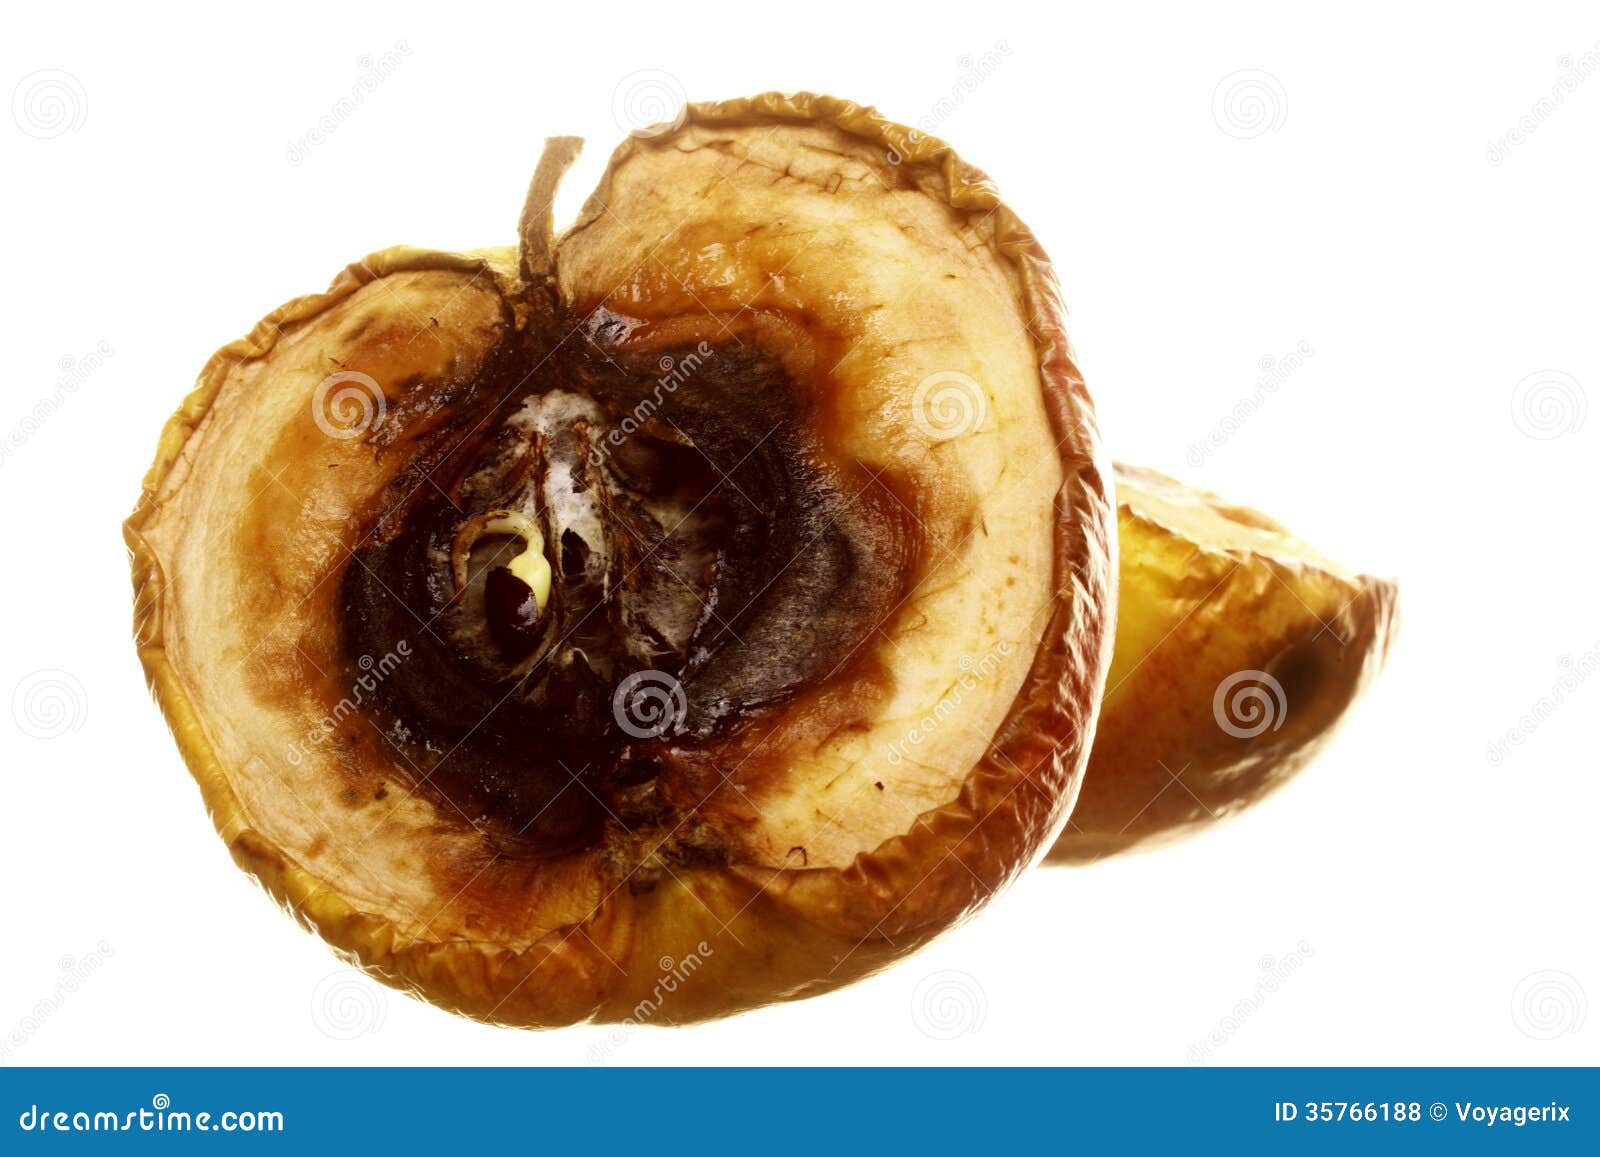 rotten-apple-halves-isolated-food-waste-disgusting-white-background-35766188.jpg